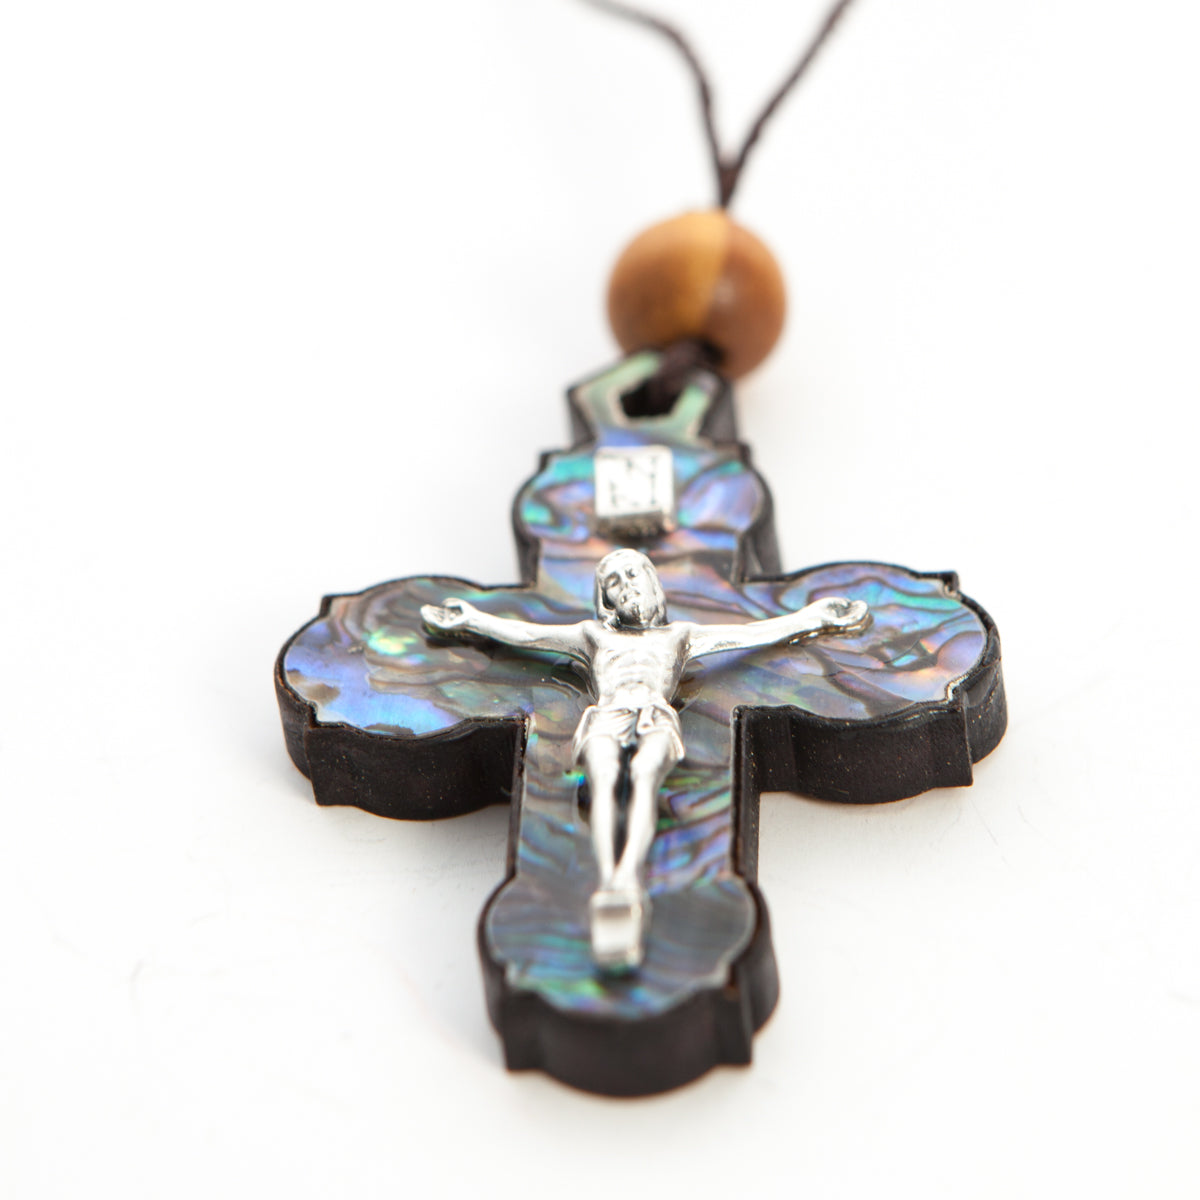 Blue-Green Mother of Pearl INRI Crucifix Necklace with a Bead on Olive Wood Base